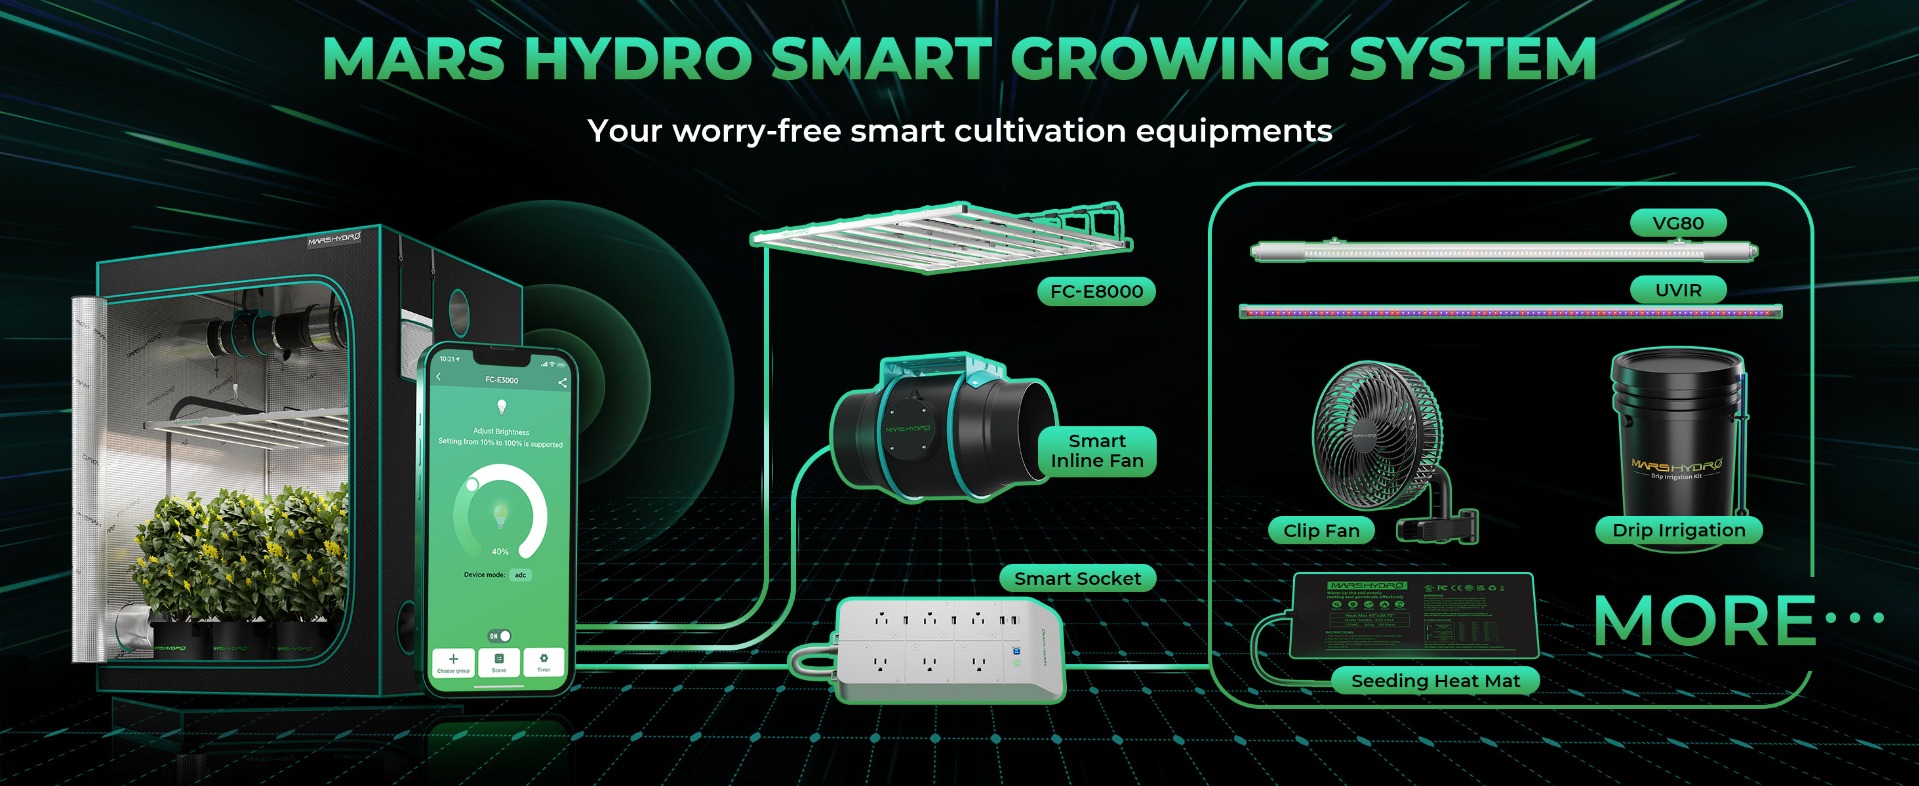 mars hydro smart growing system with fc-e8000 led grow light